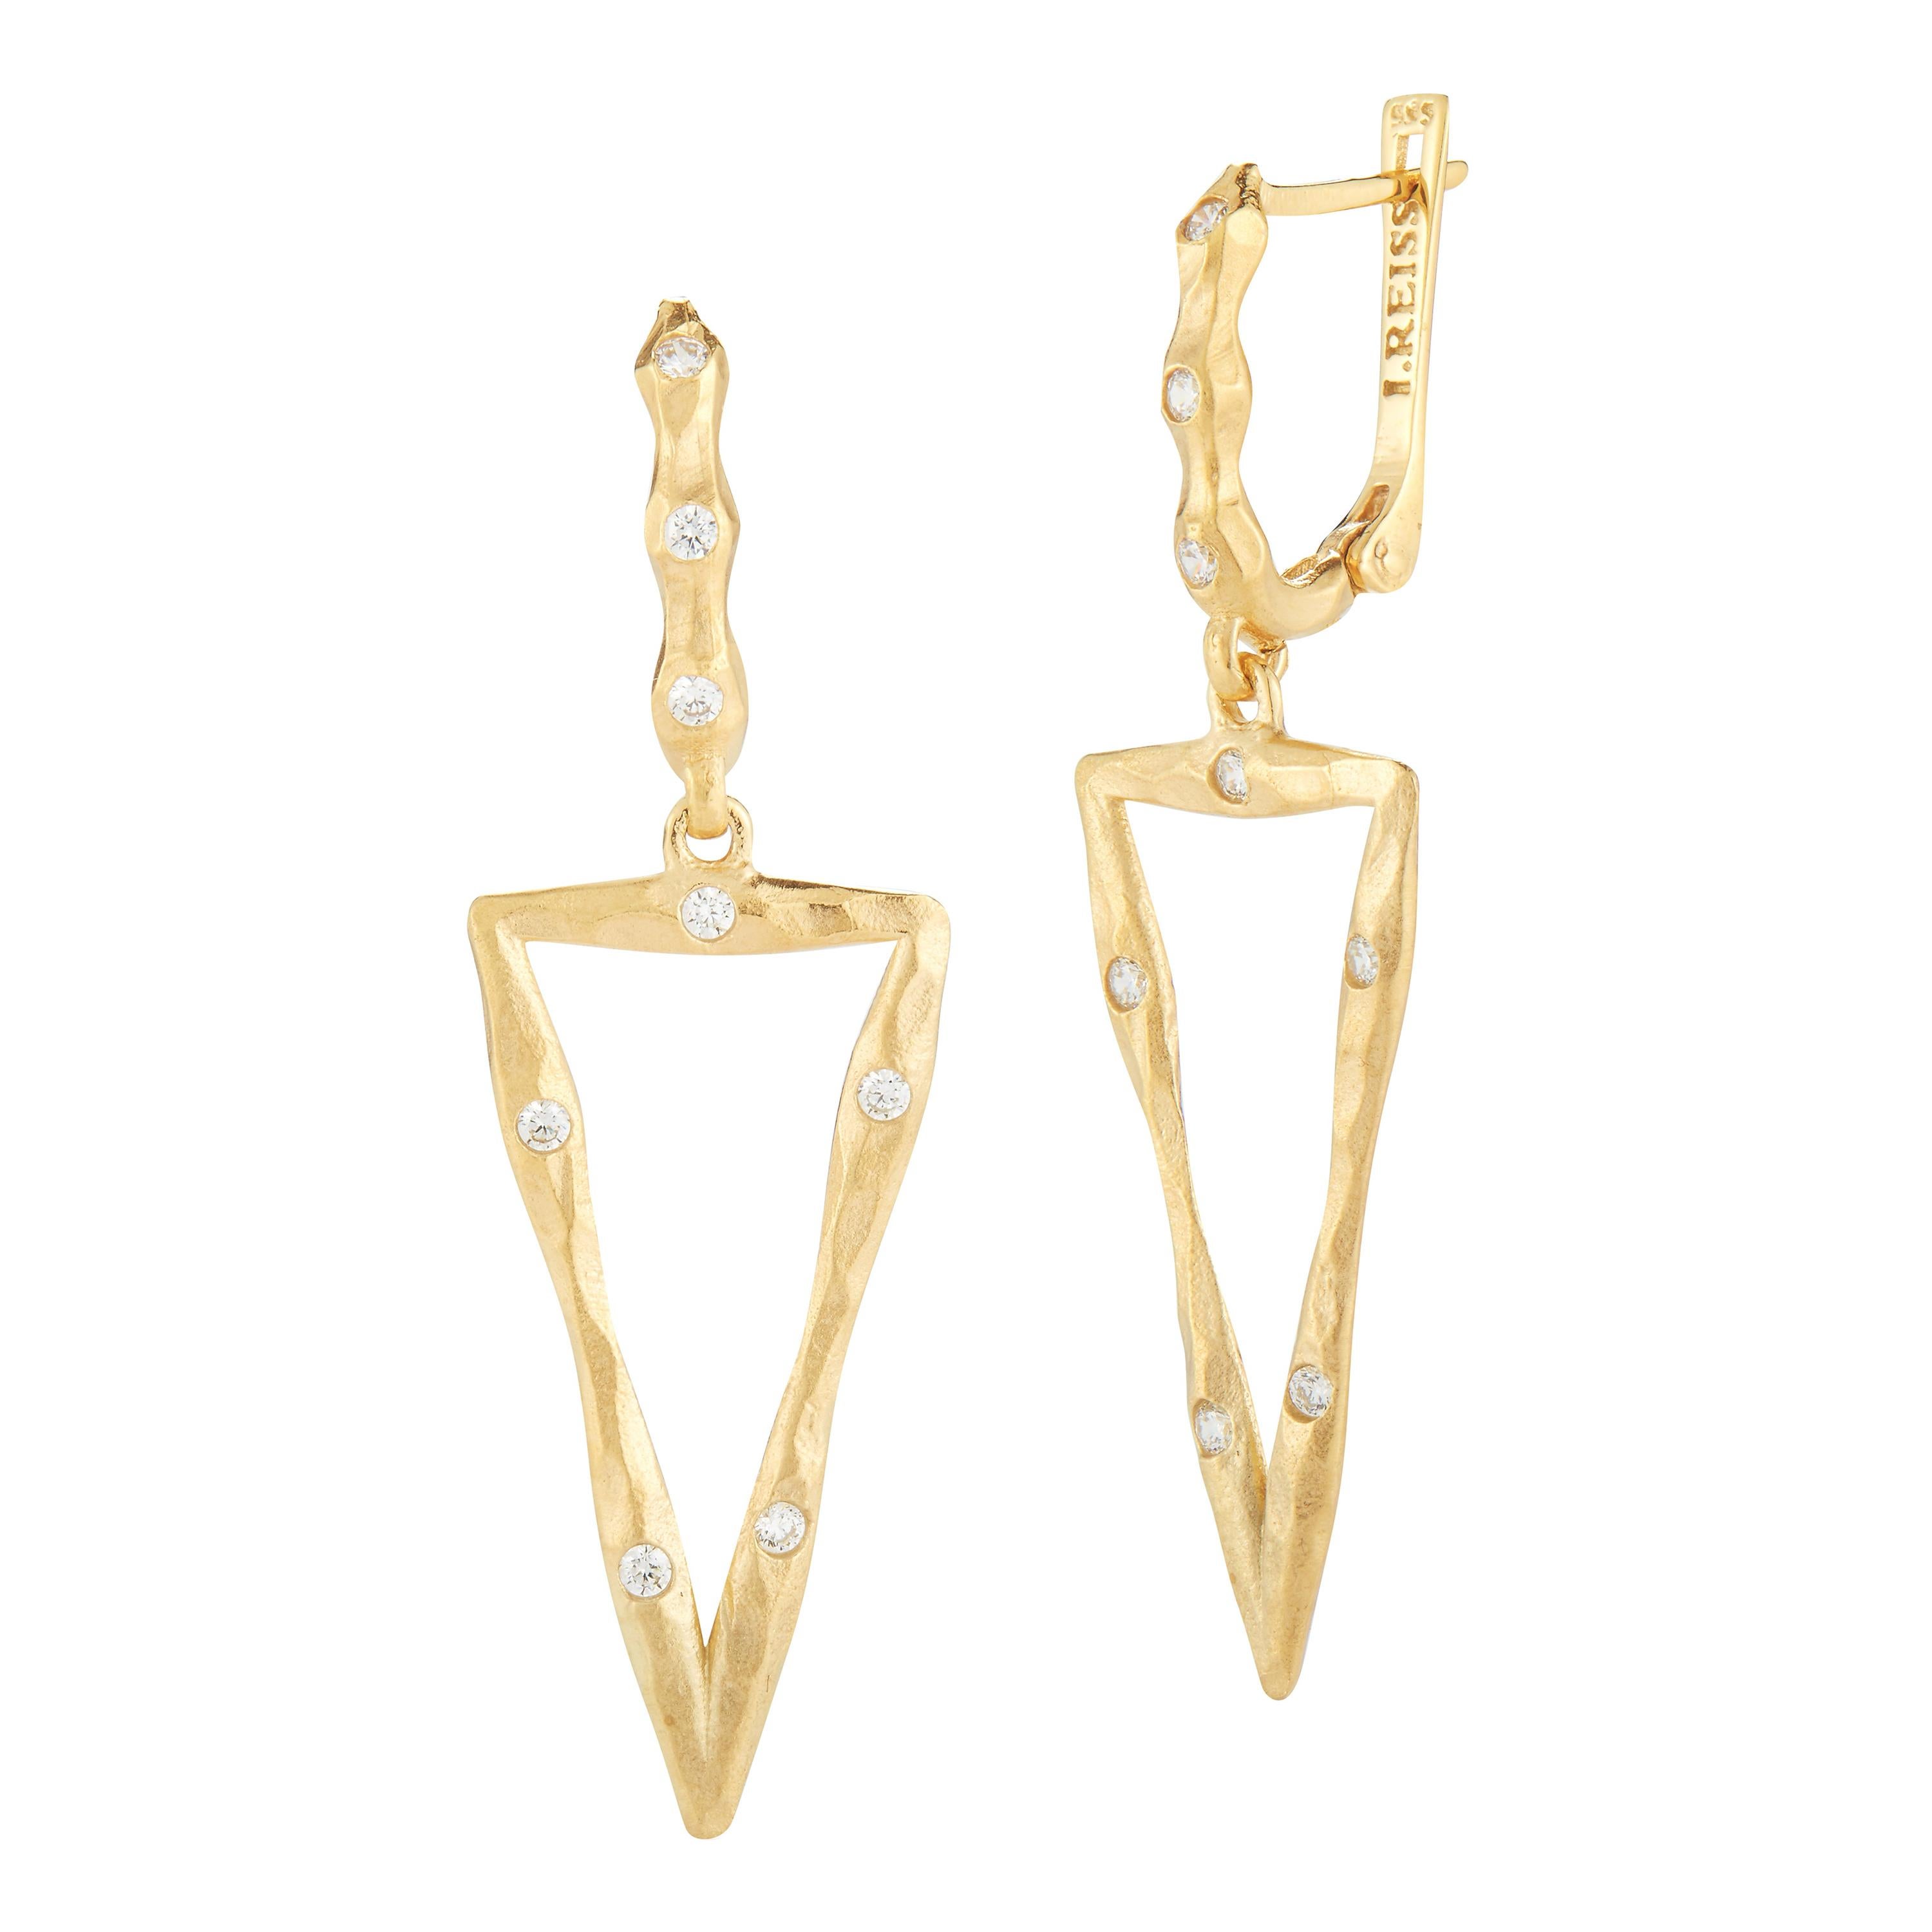 Handcrafted Satin-Finished Dangling Triangle Earrings For Sale